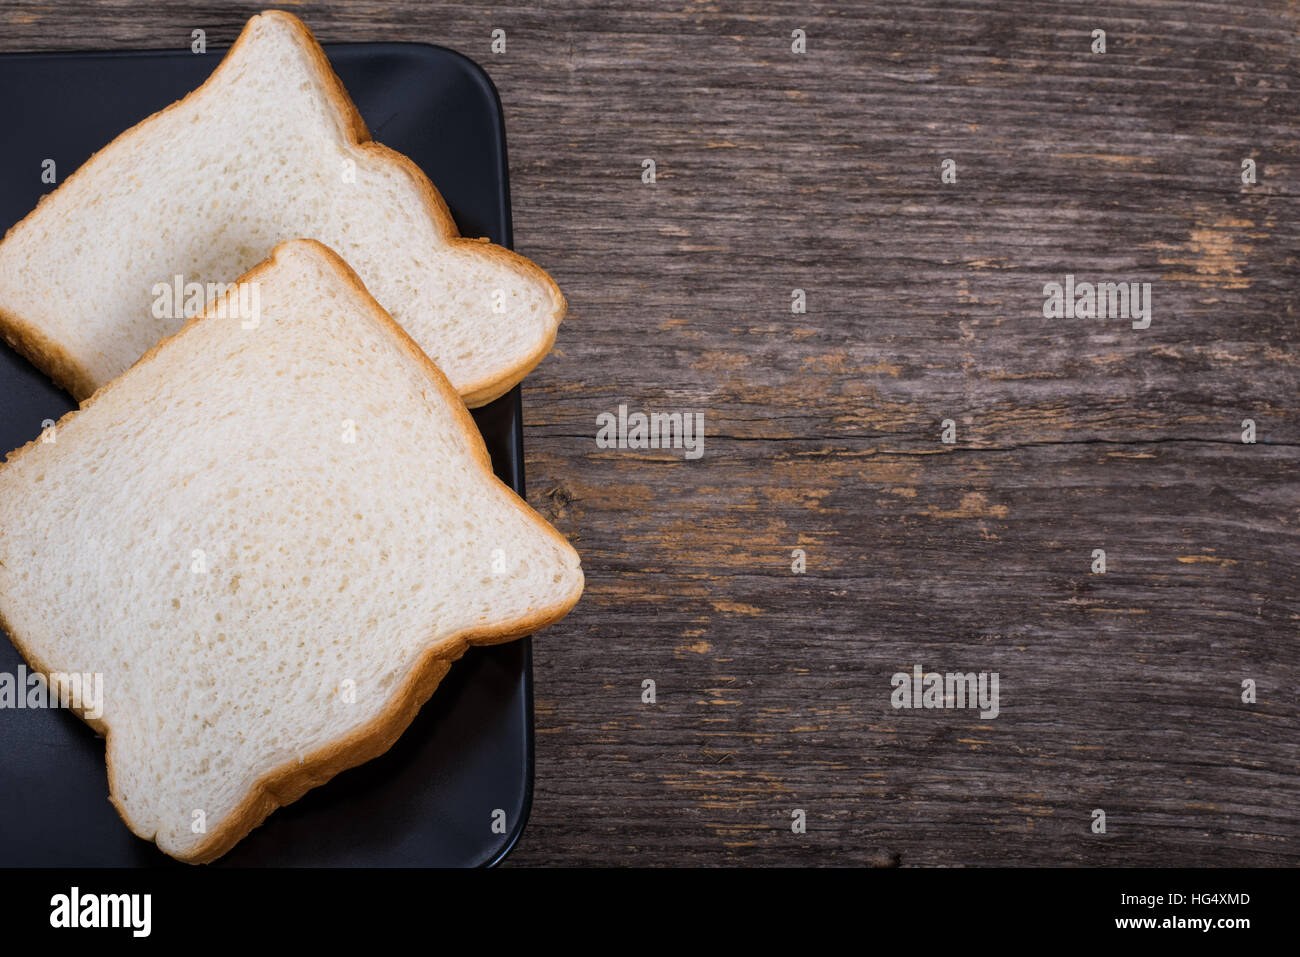 Slices of bread on the plate on the table in natural light Stock Photo